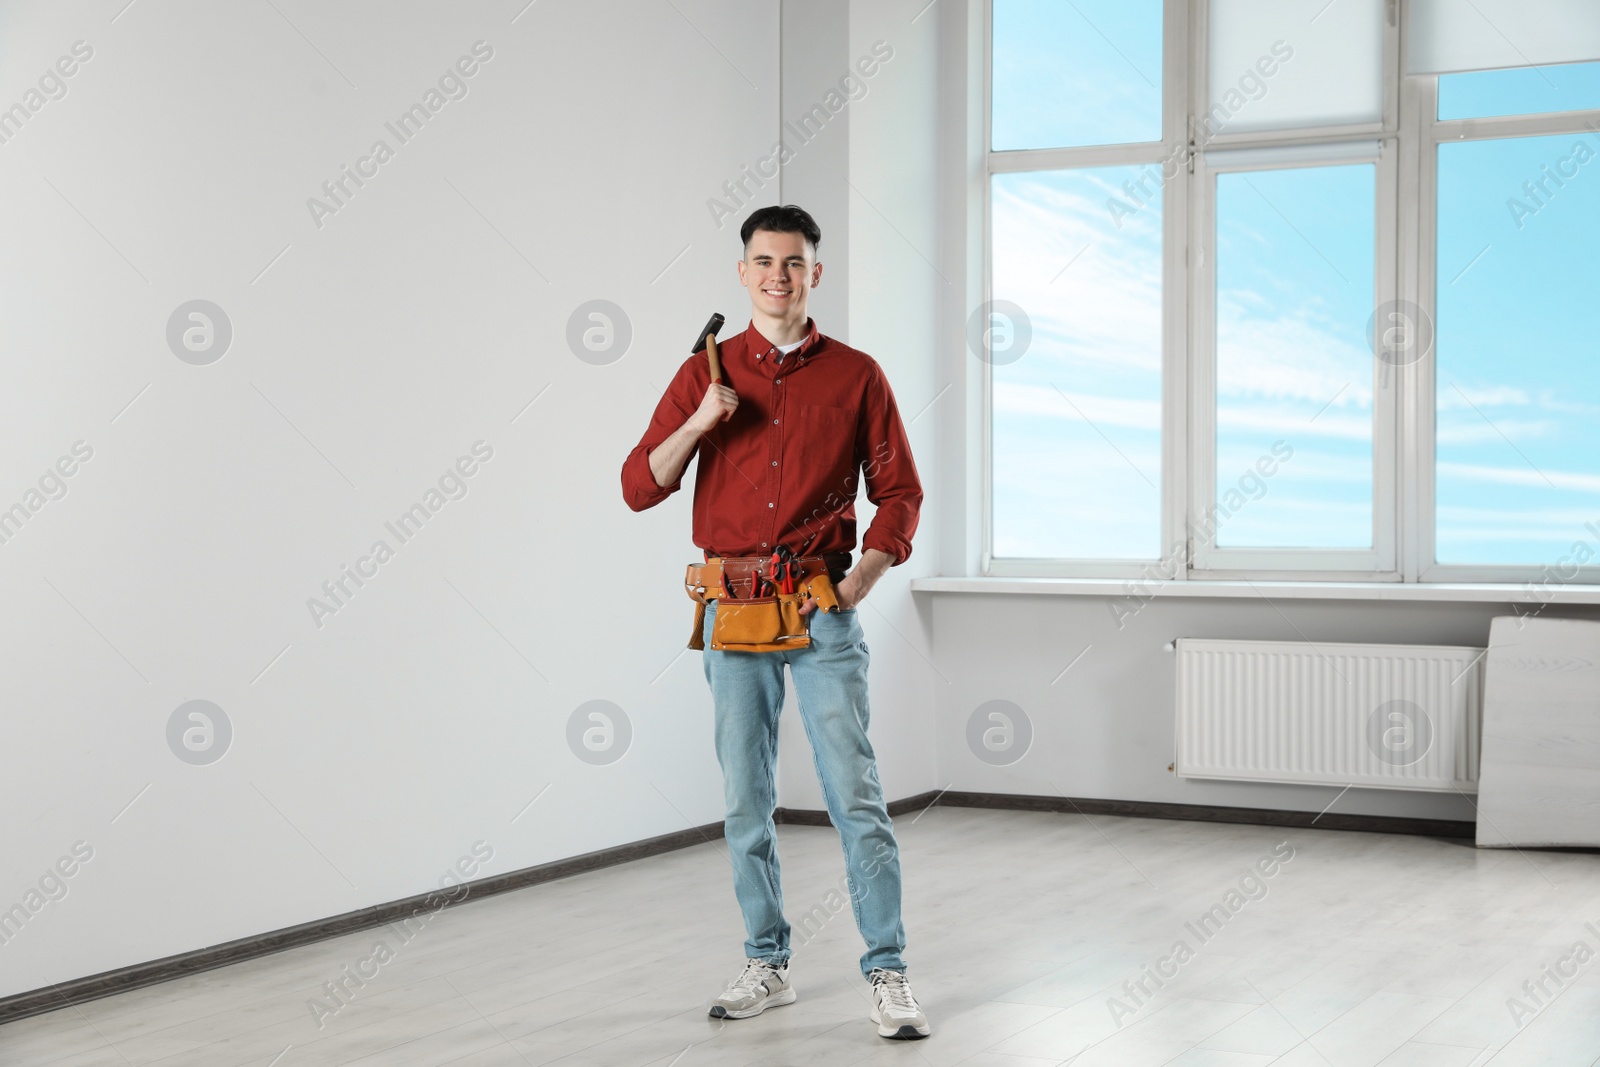 Photo of Handyman with tool belt and hammer in empty room